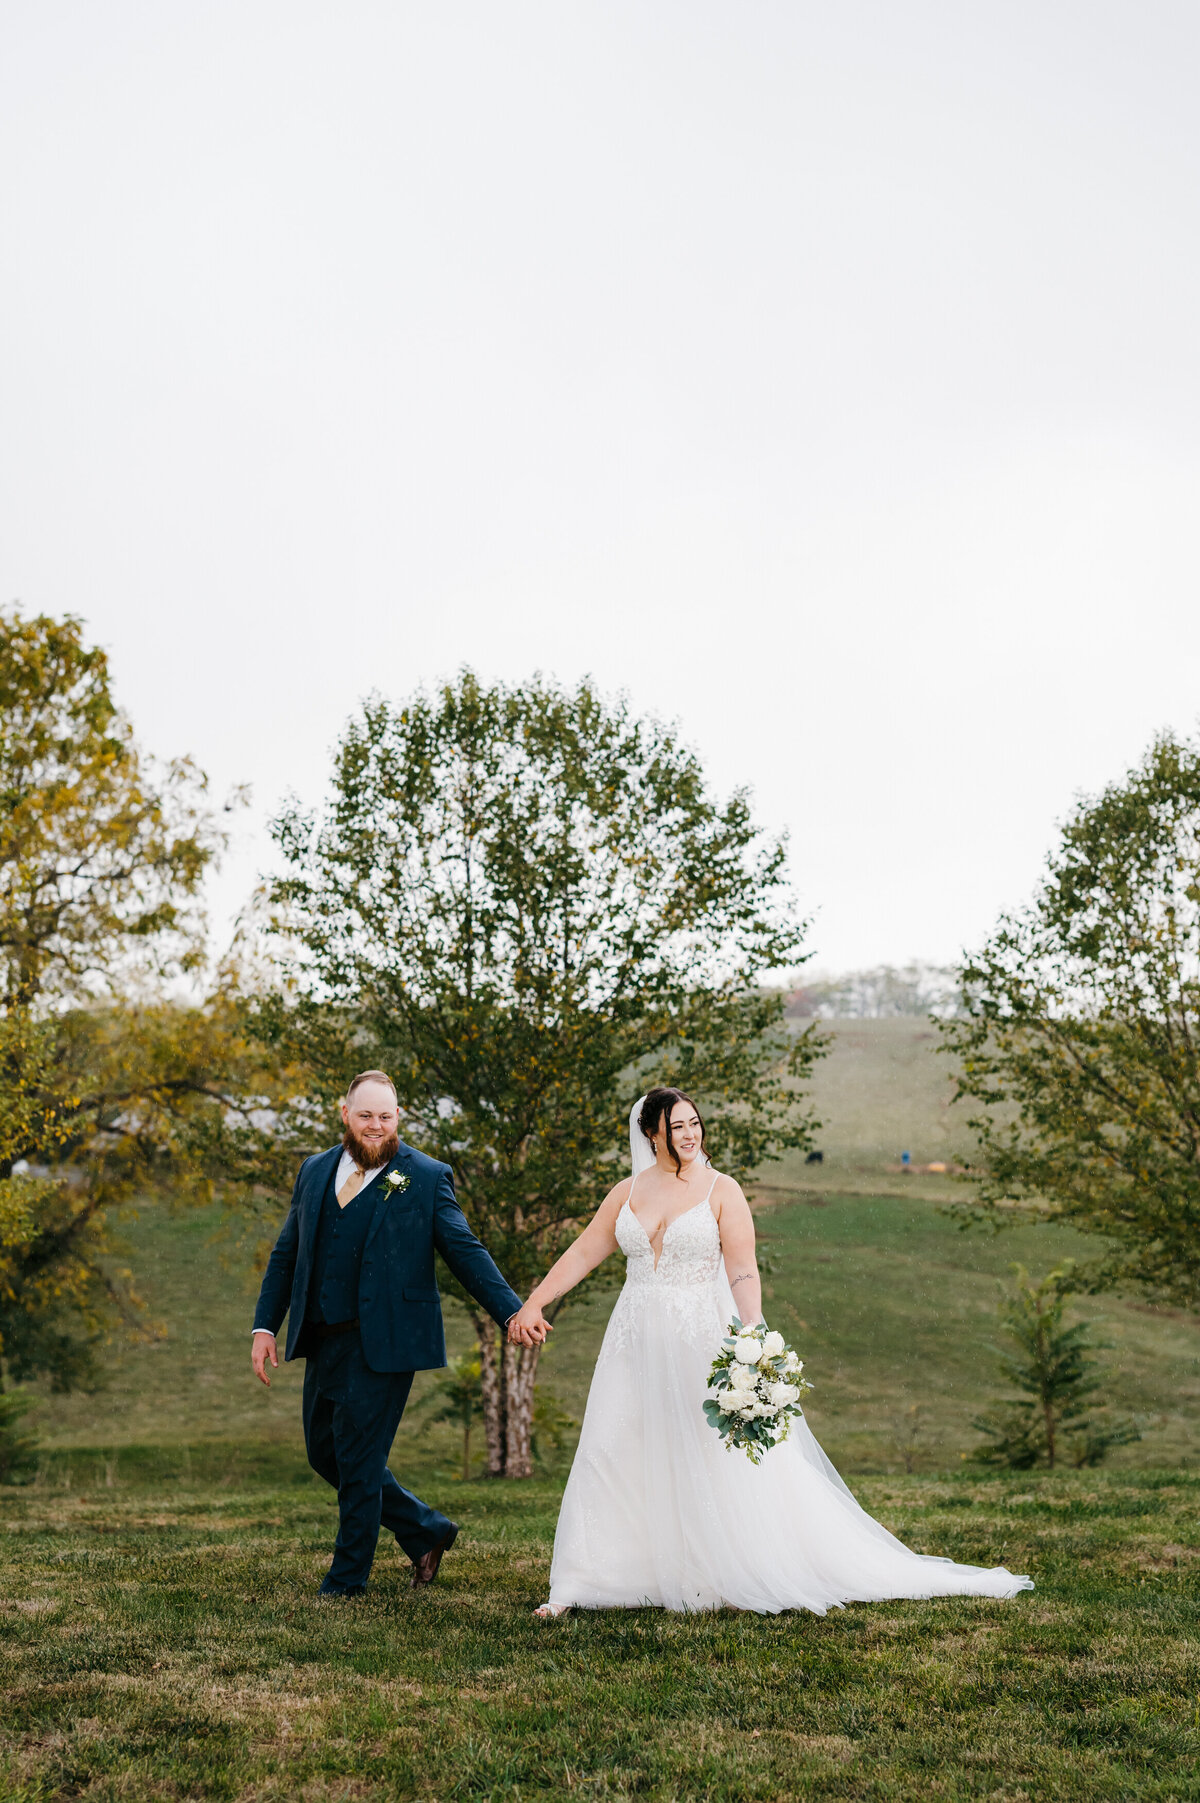 Sunny Slope Farm wedding with bride and groom holding hands and walking through a pasture together with trees in the distance and the sun shining over the mountain and onto the tops of those trees